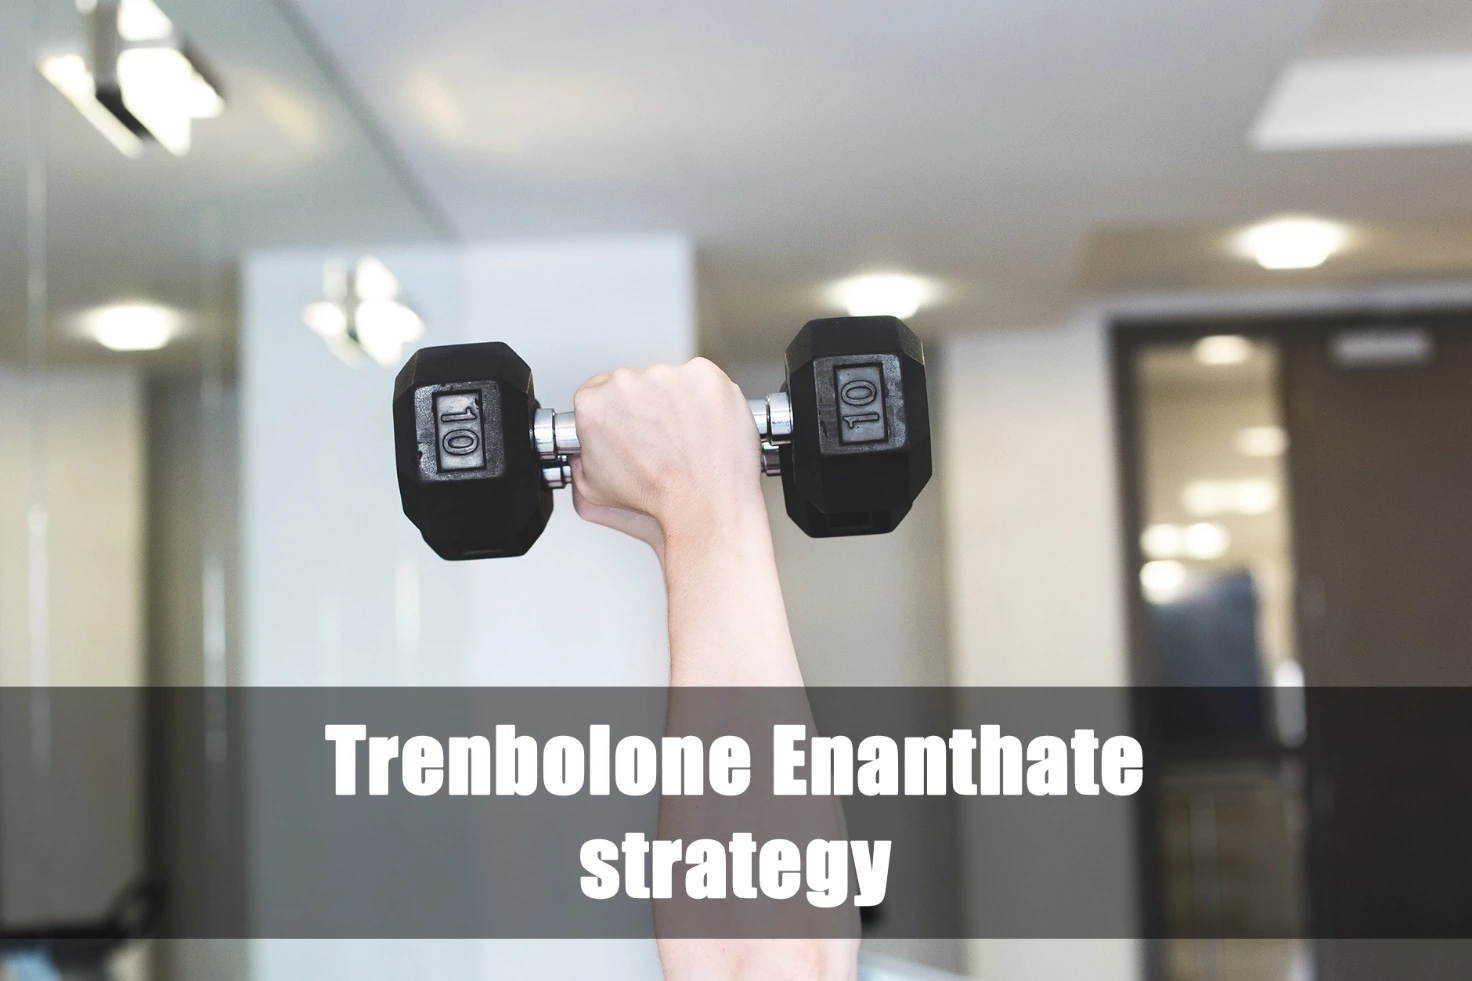 Trenbolone Enanthate strategy